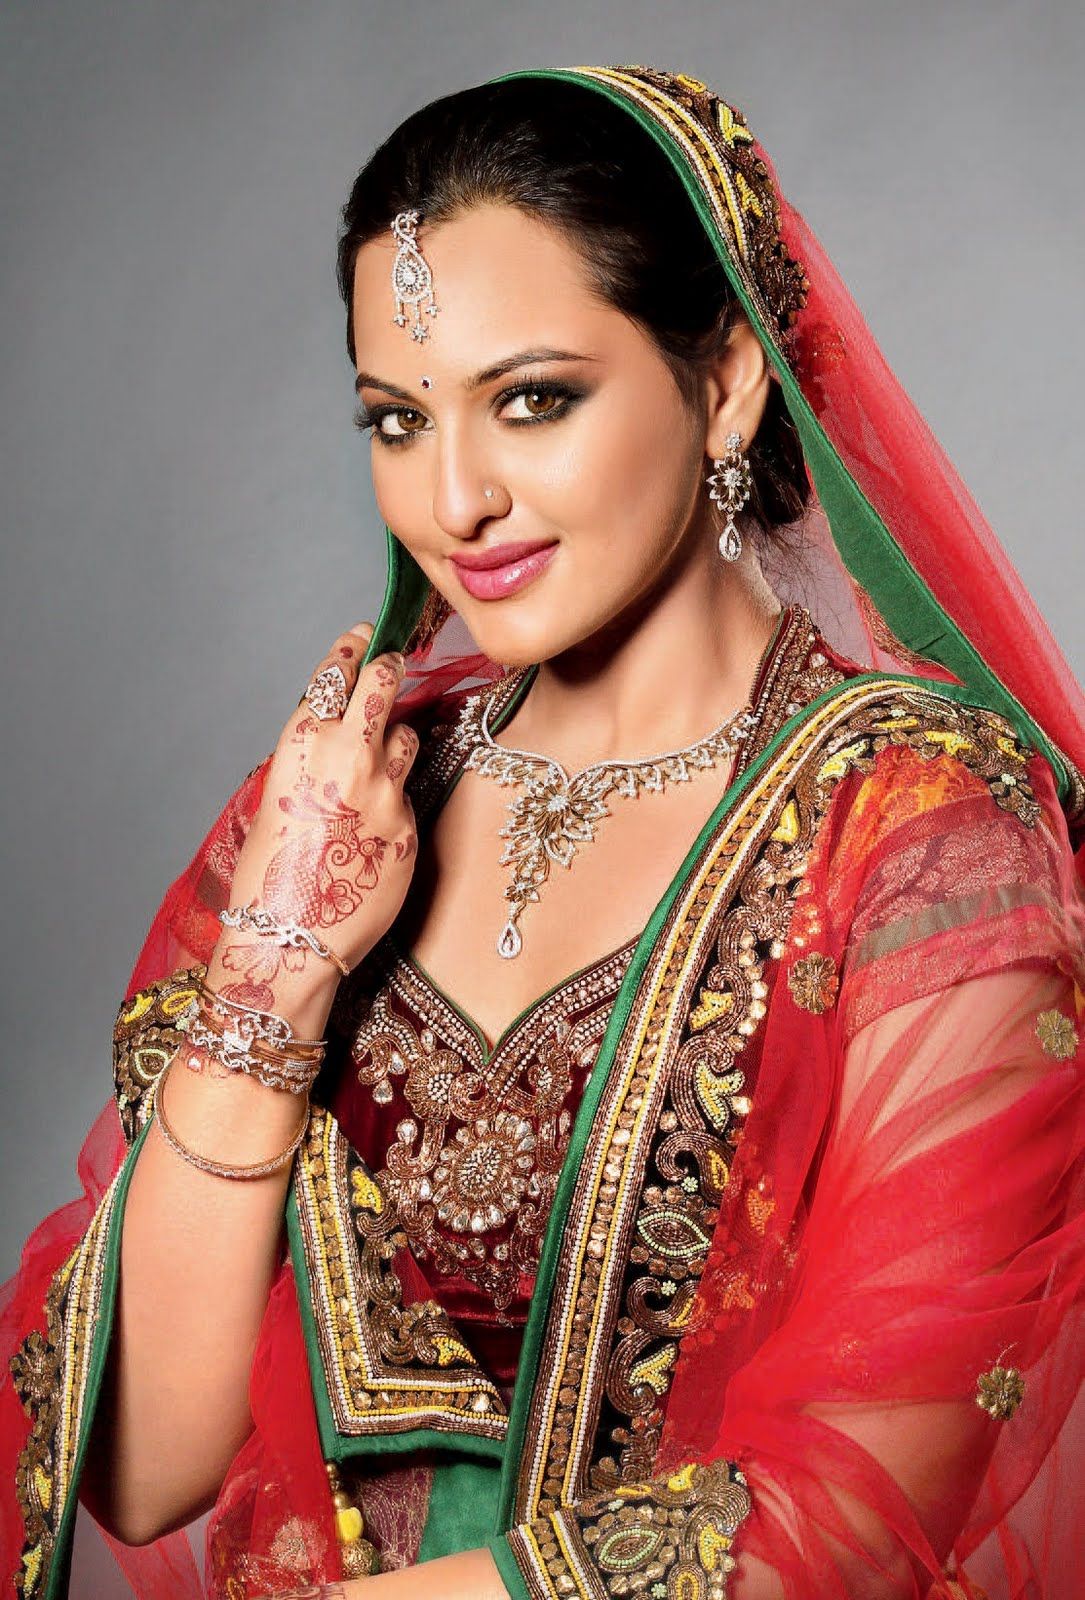 Sonakshi Sinha: I am here because of the love for what I do